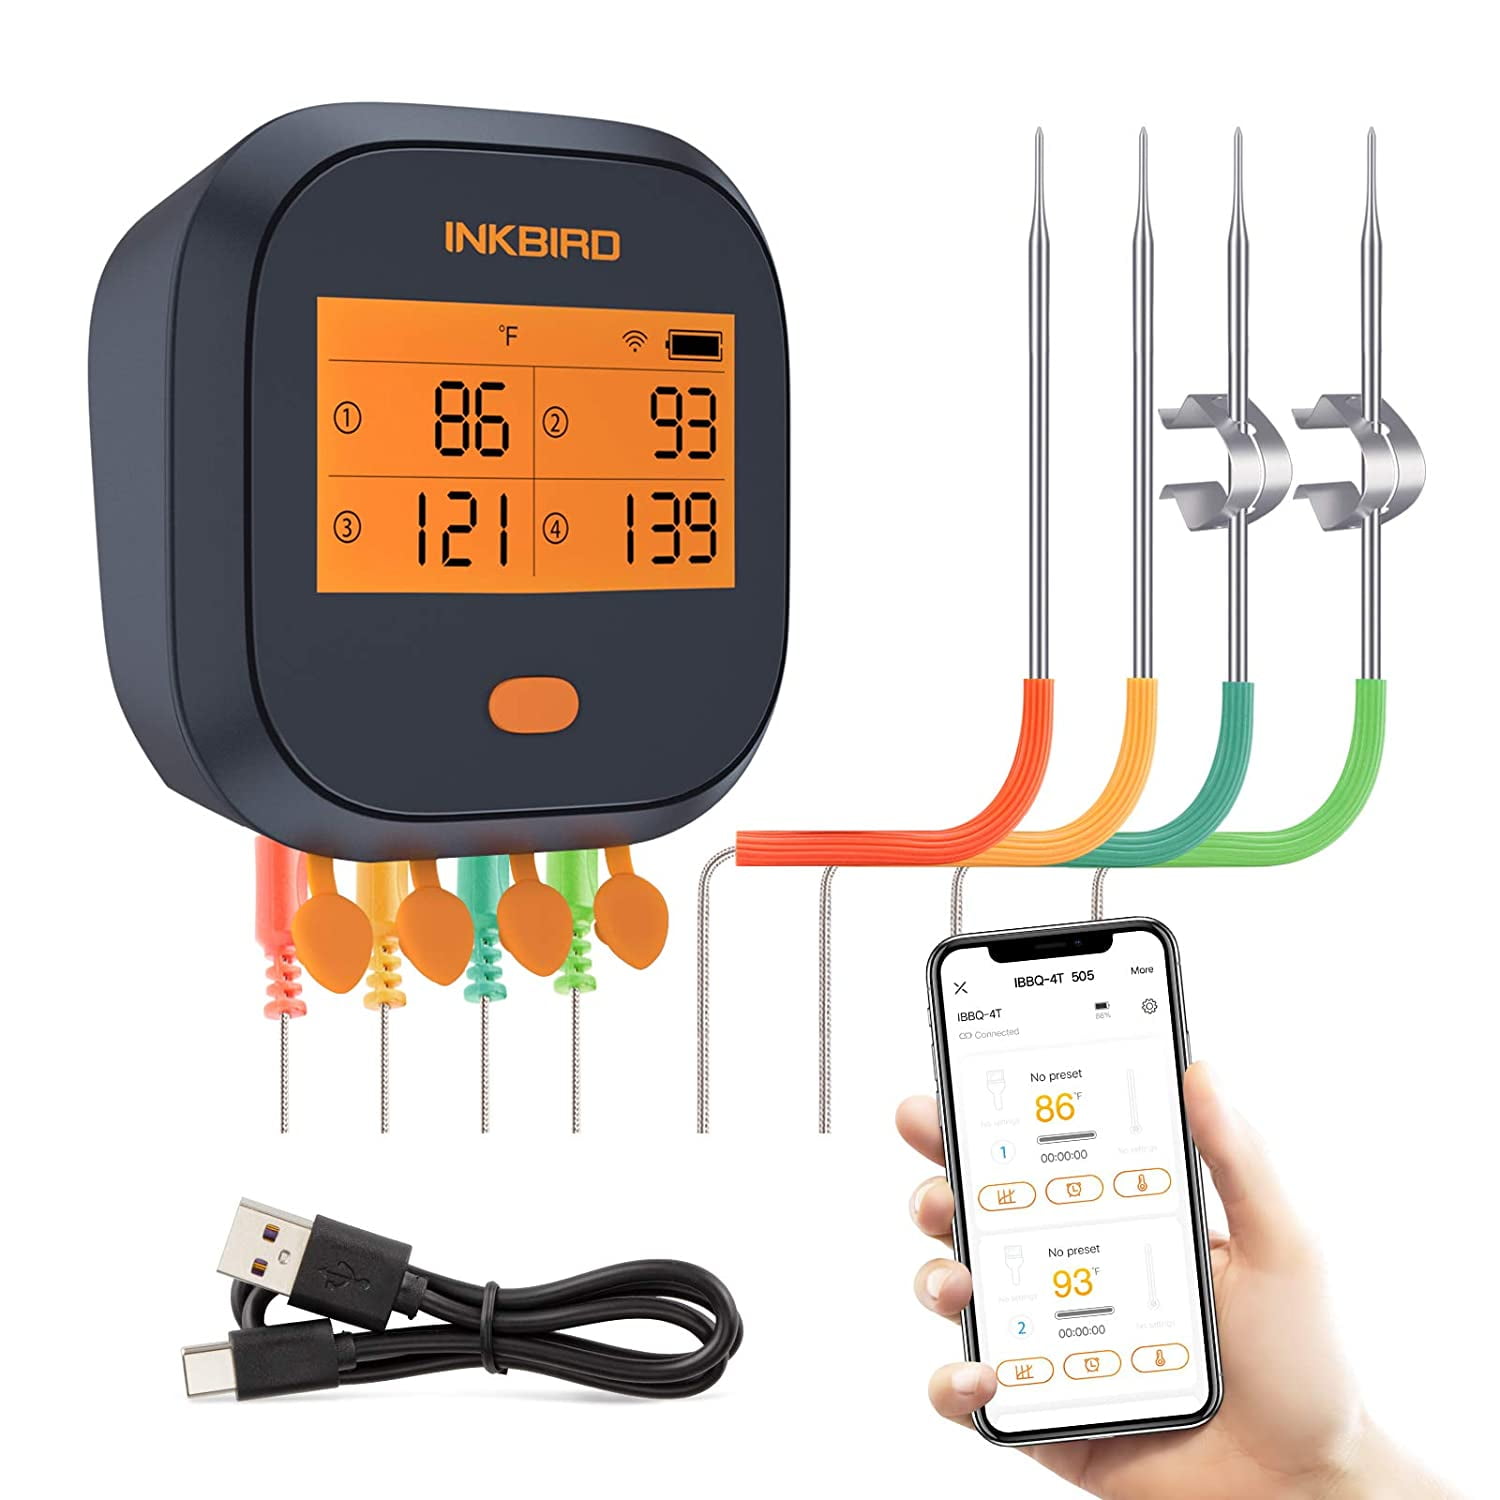 BBQ Smoker Inkbird WiFi Thermometer Food Remote Control Temp Gauge  Rechargeable